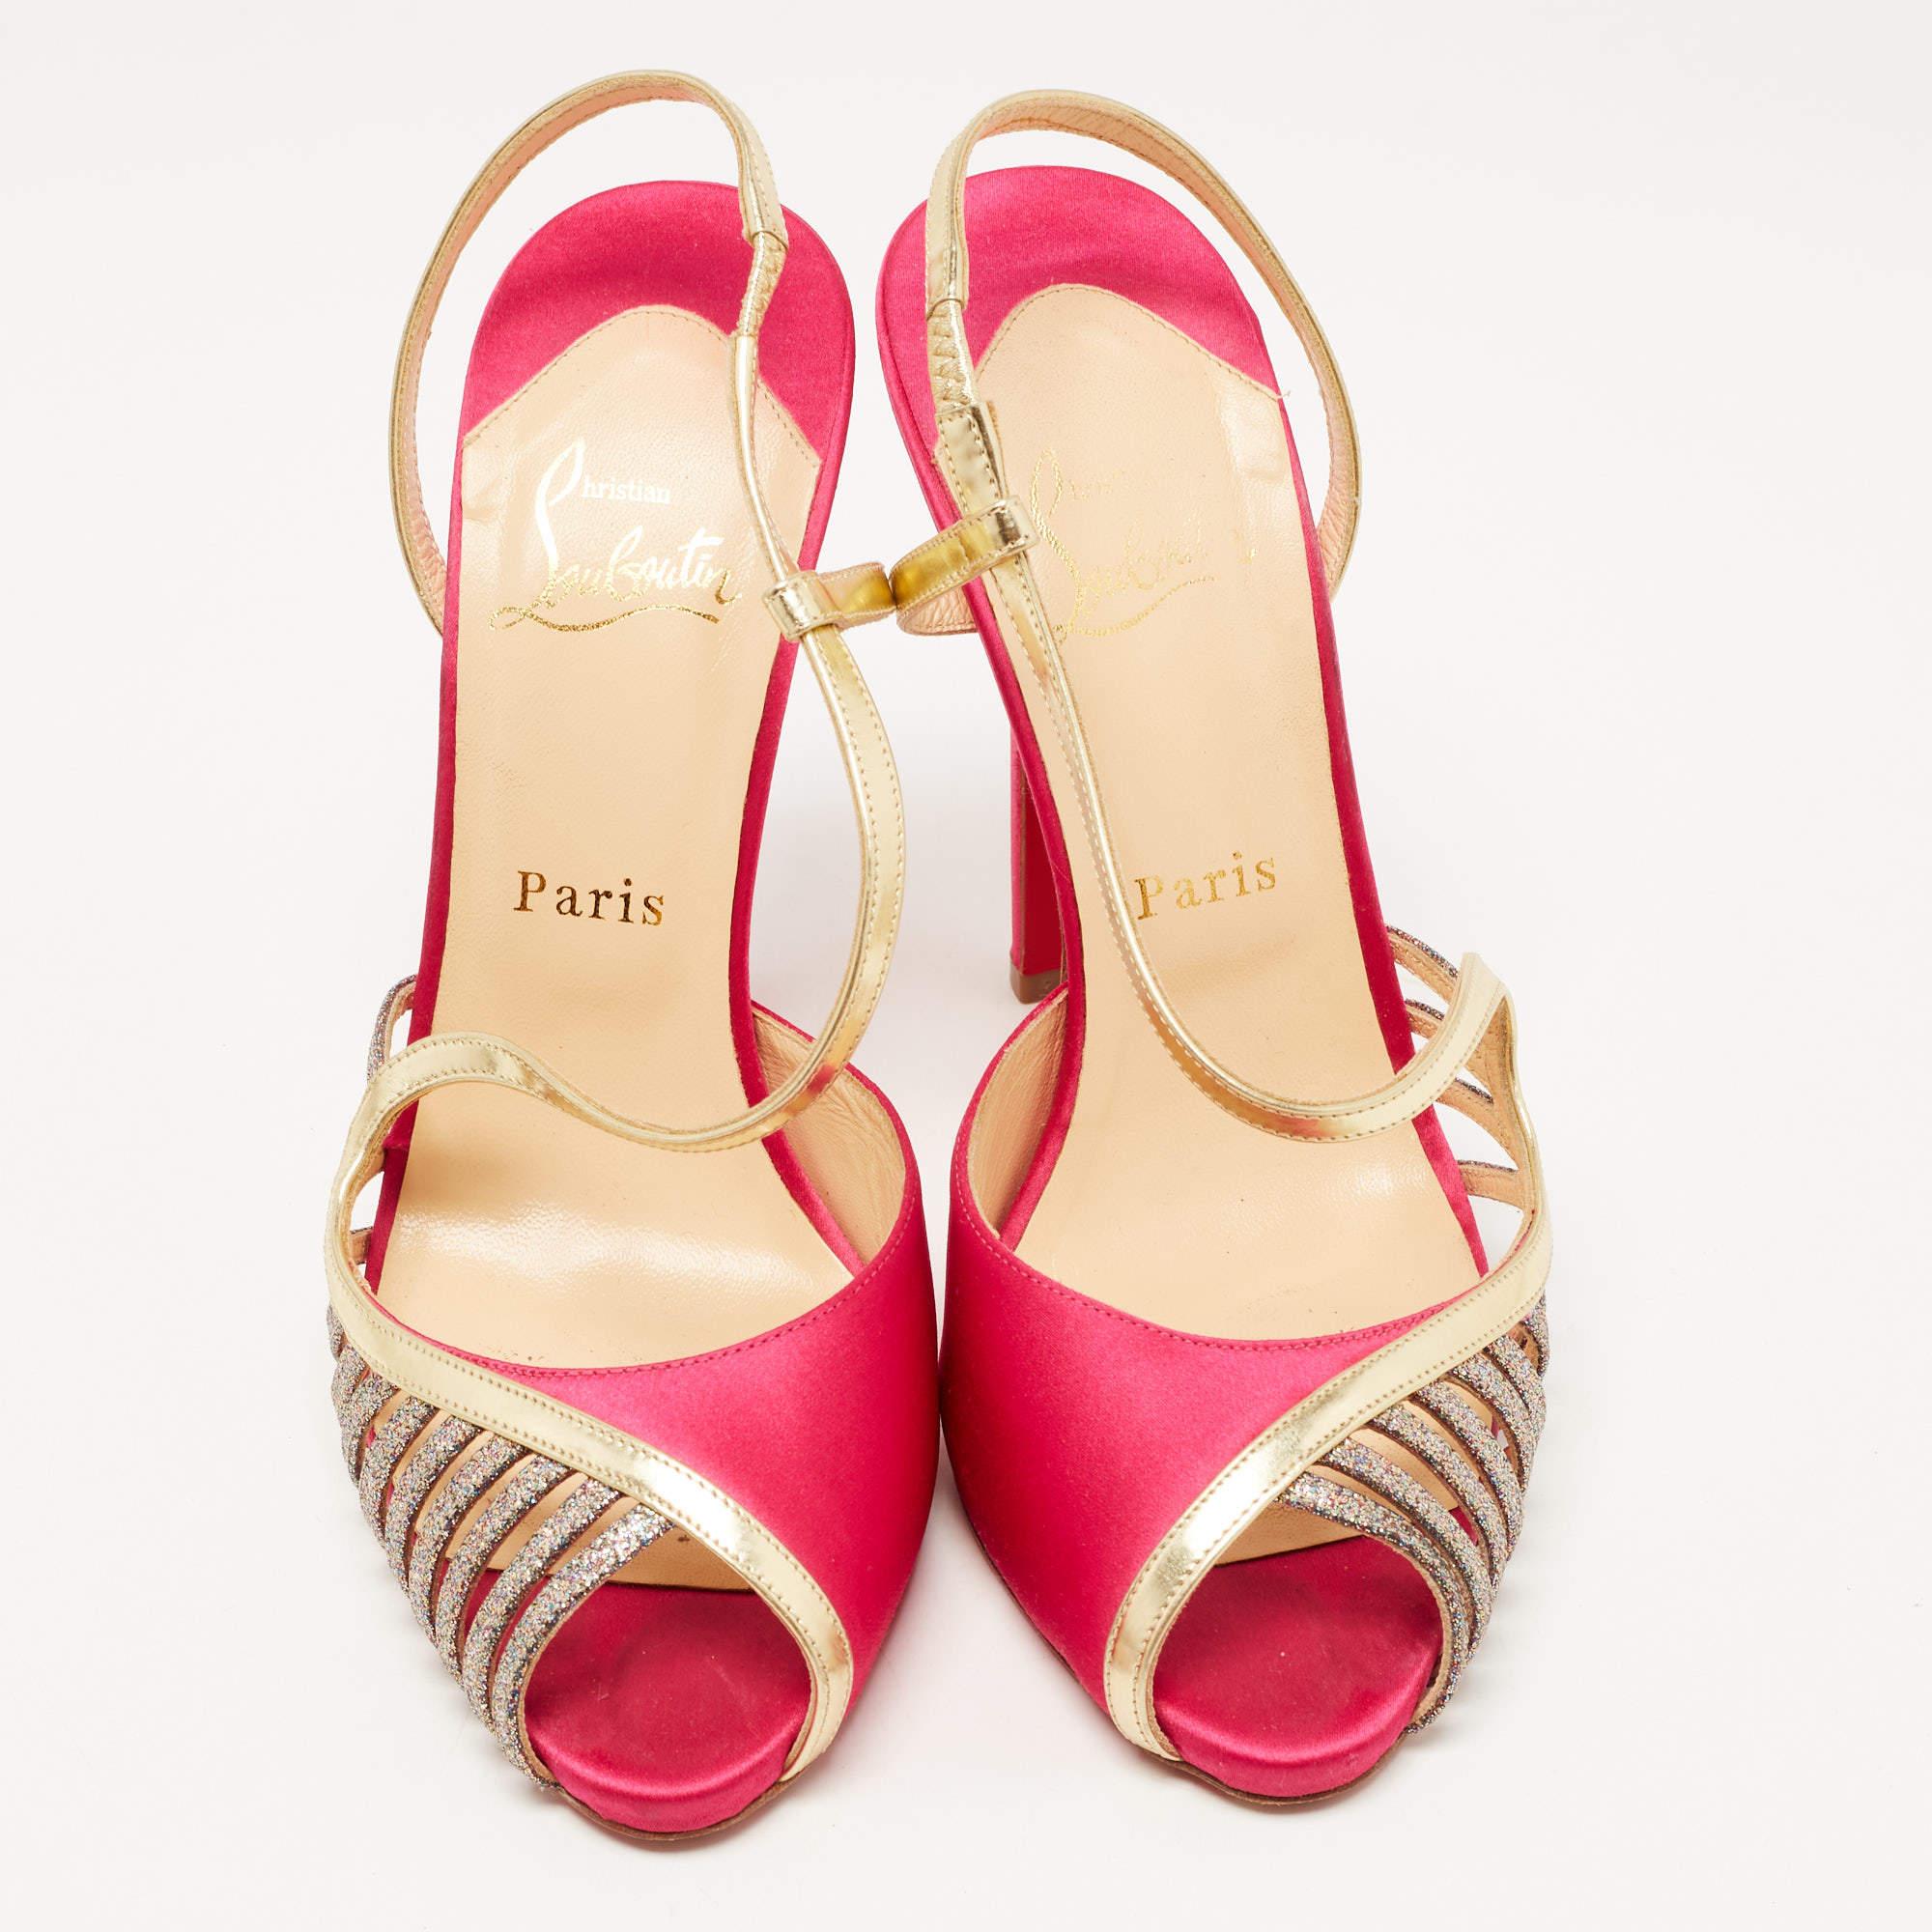 Beige Christian Louboutin Pink/Gold Satin, Leather and Glitter Strappy Sandals Size 39